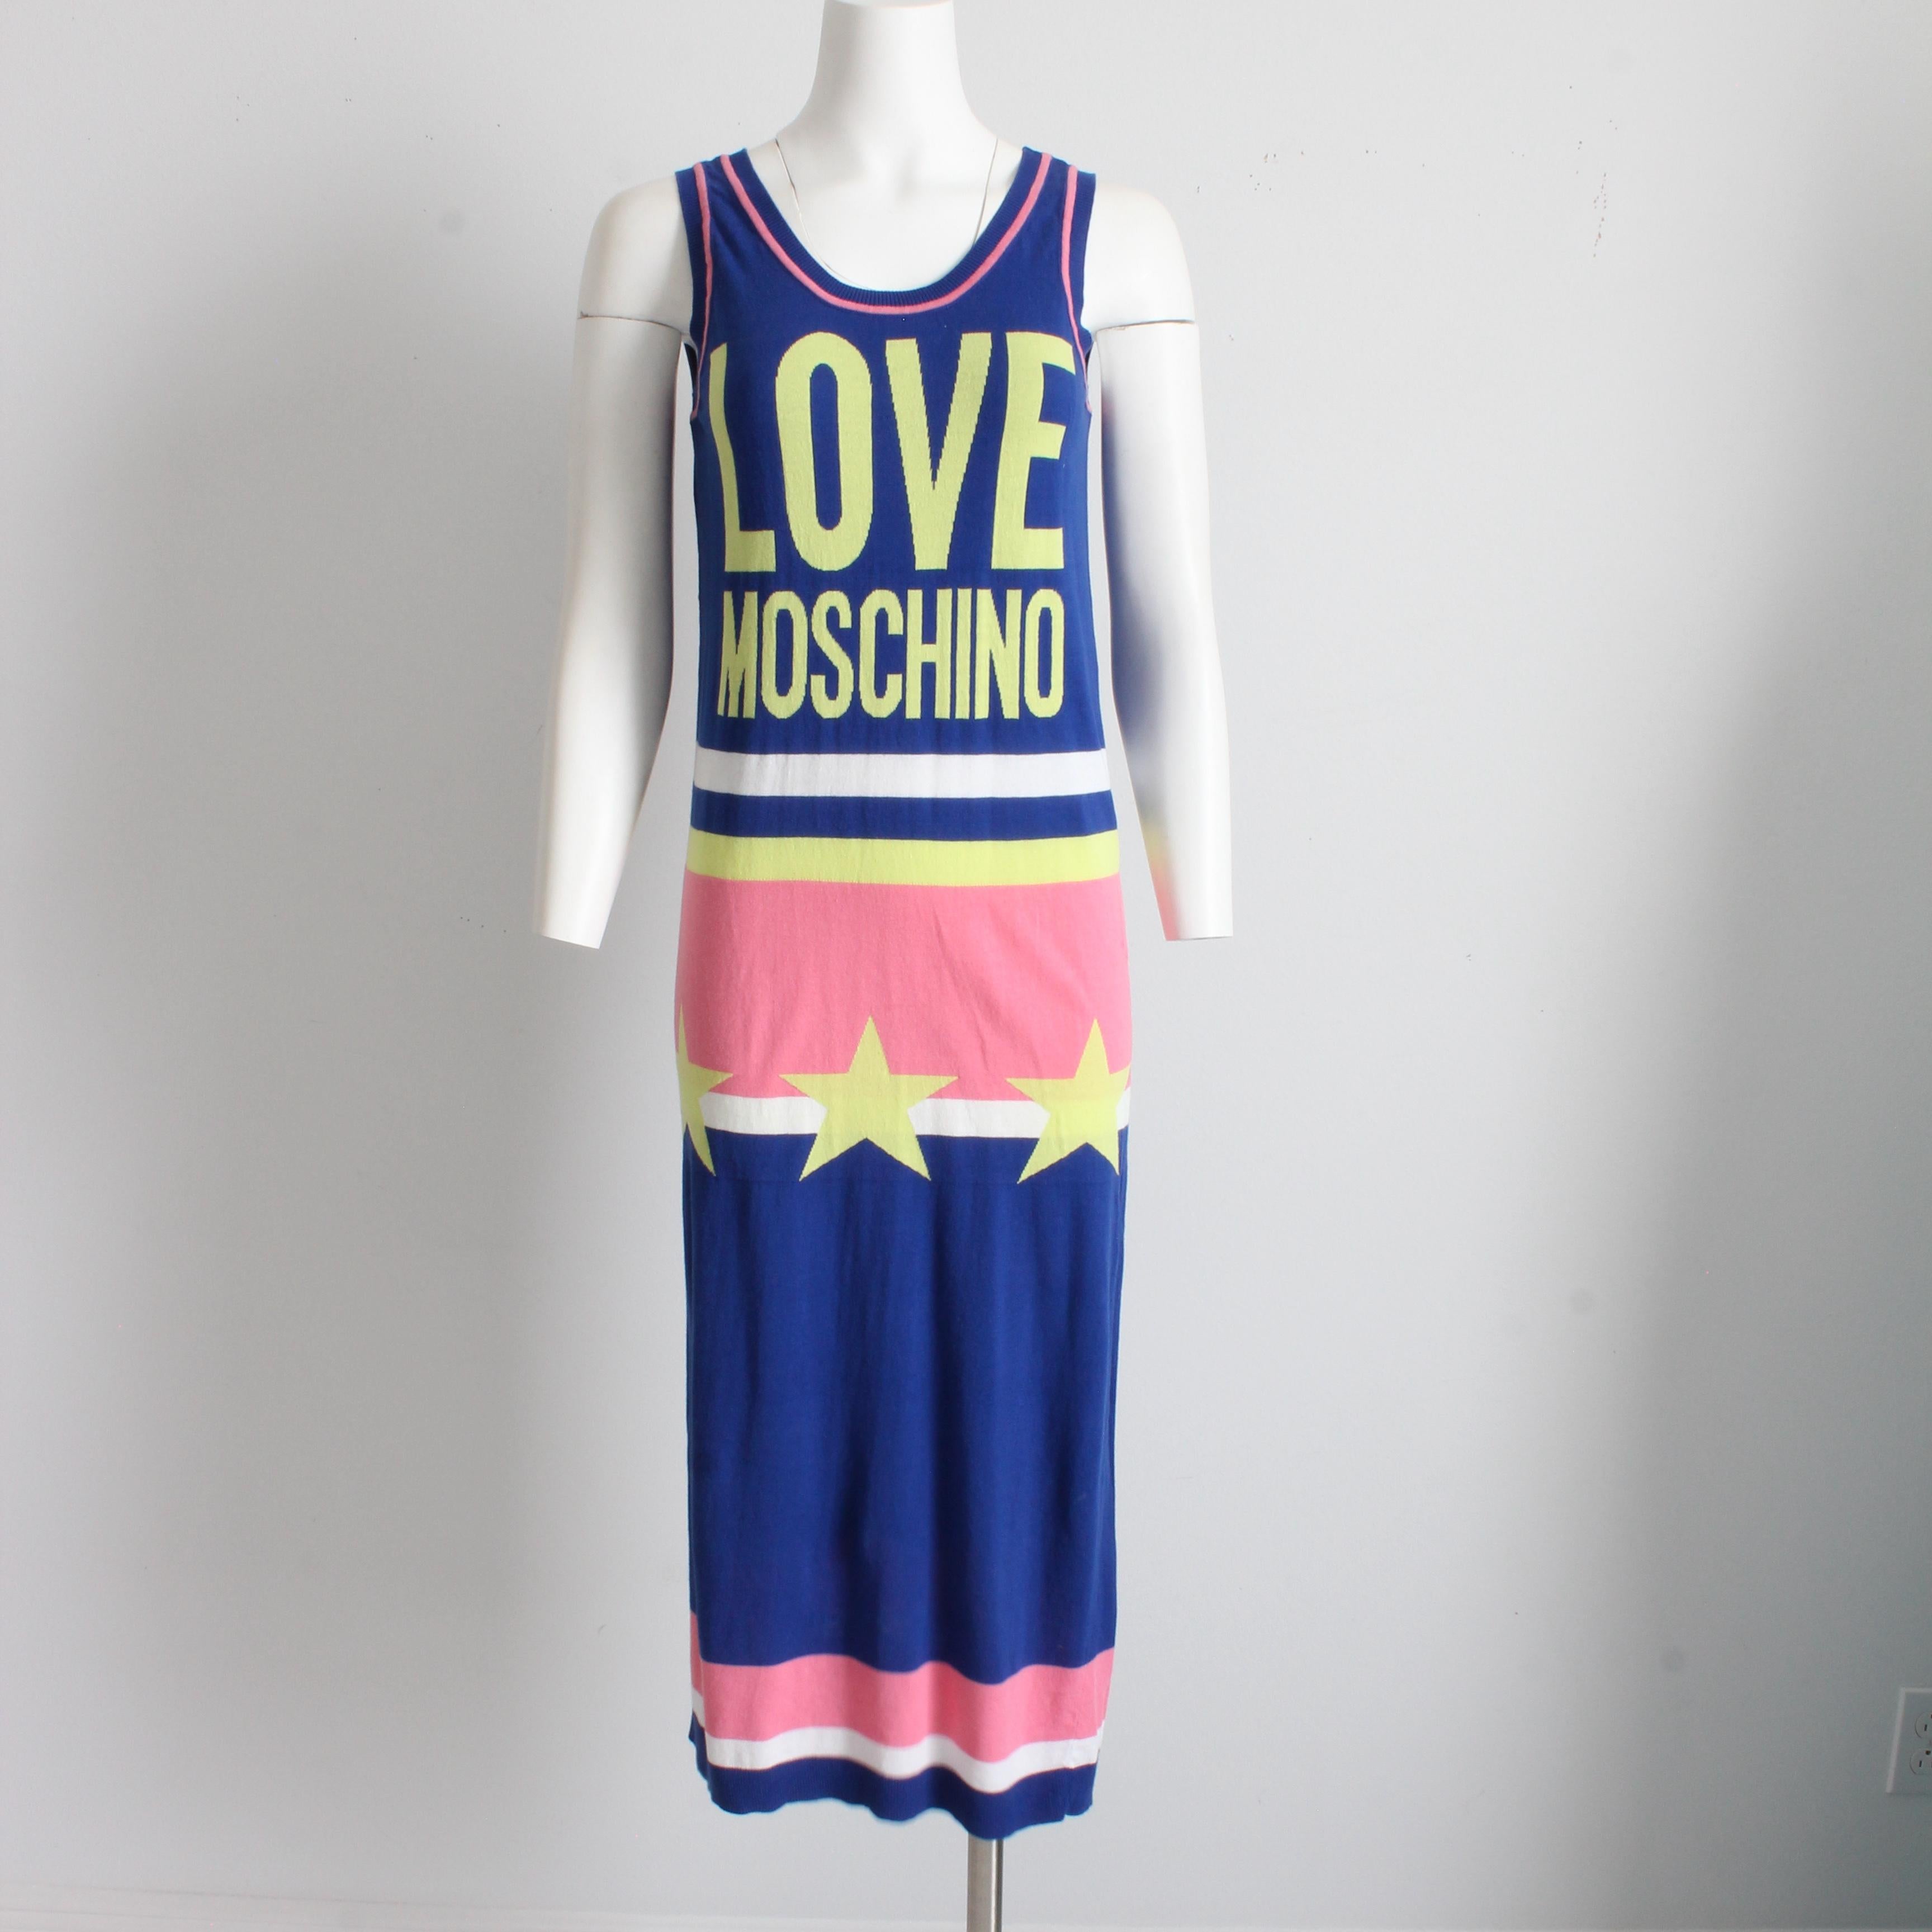 Preowned, almost vintage maxi dress by Moschino, made for their LOVE MOSCHINO line, most likely in the mid 2000s. 

Made from a soft cotton knit in blue and pink color block, it has sporty graphic stars and LOVE MOSCHINO at the chest. 

The perfect